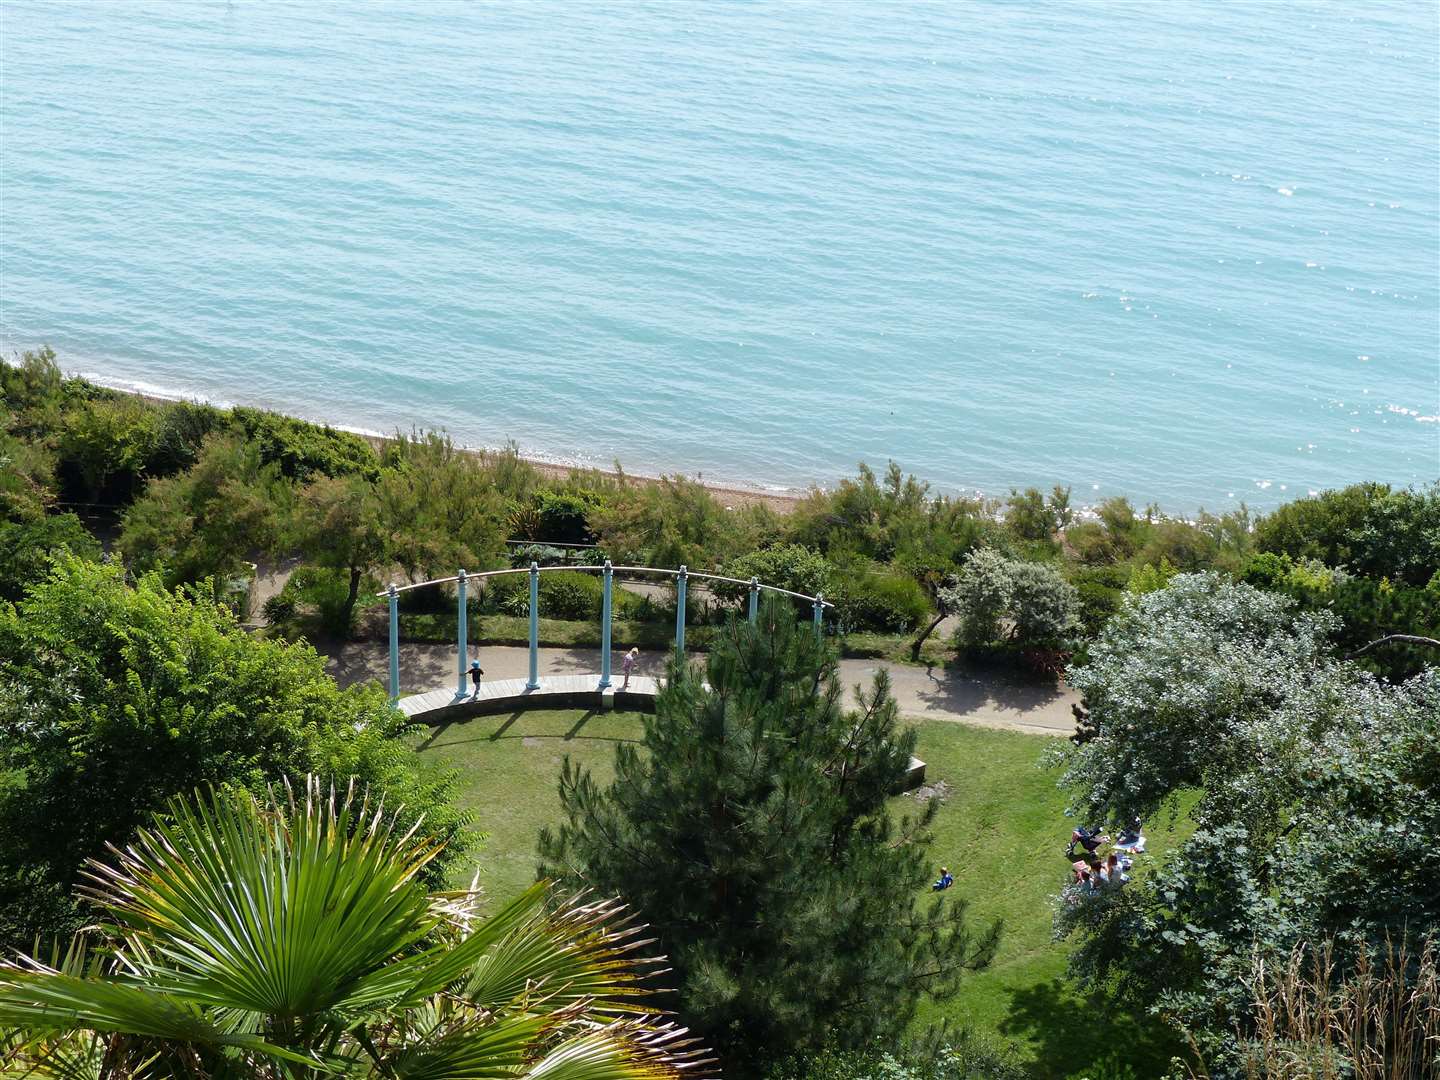 Enjoy a day at the coast in the Lower Leas park in Folkestone. Picture: Jane Connolly